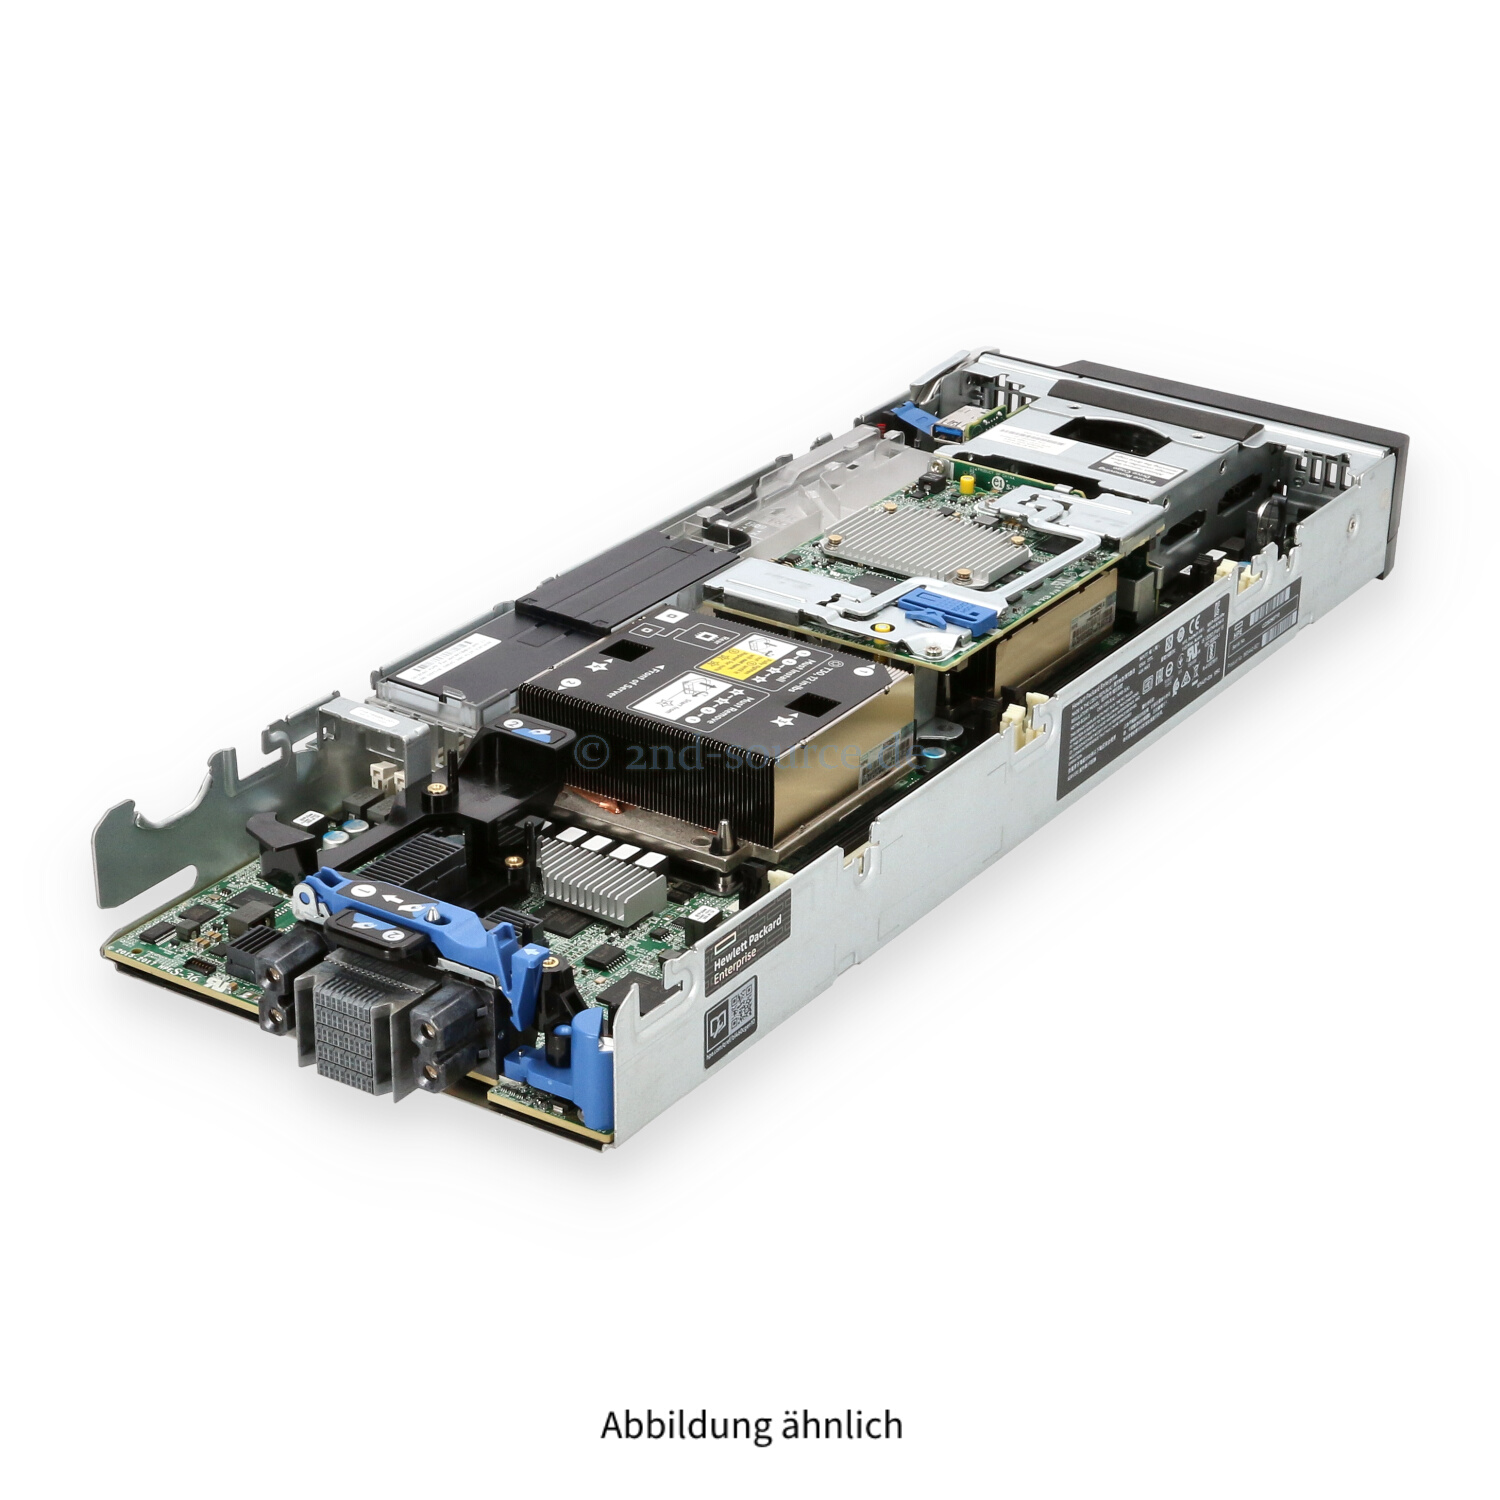 HPE BL460c G10 2xSFF P204i-b 2x HS CTO Chassis 863442-B21